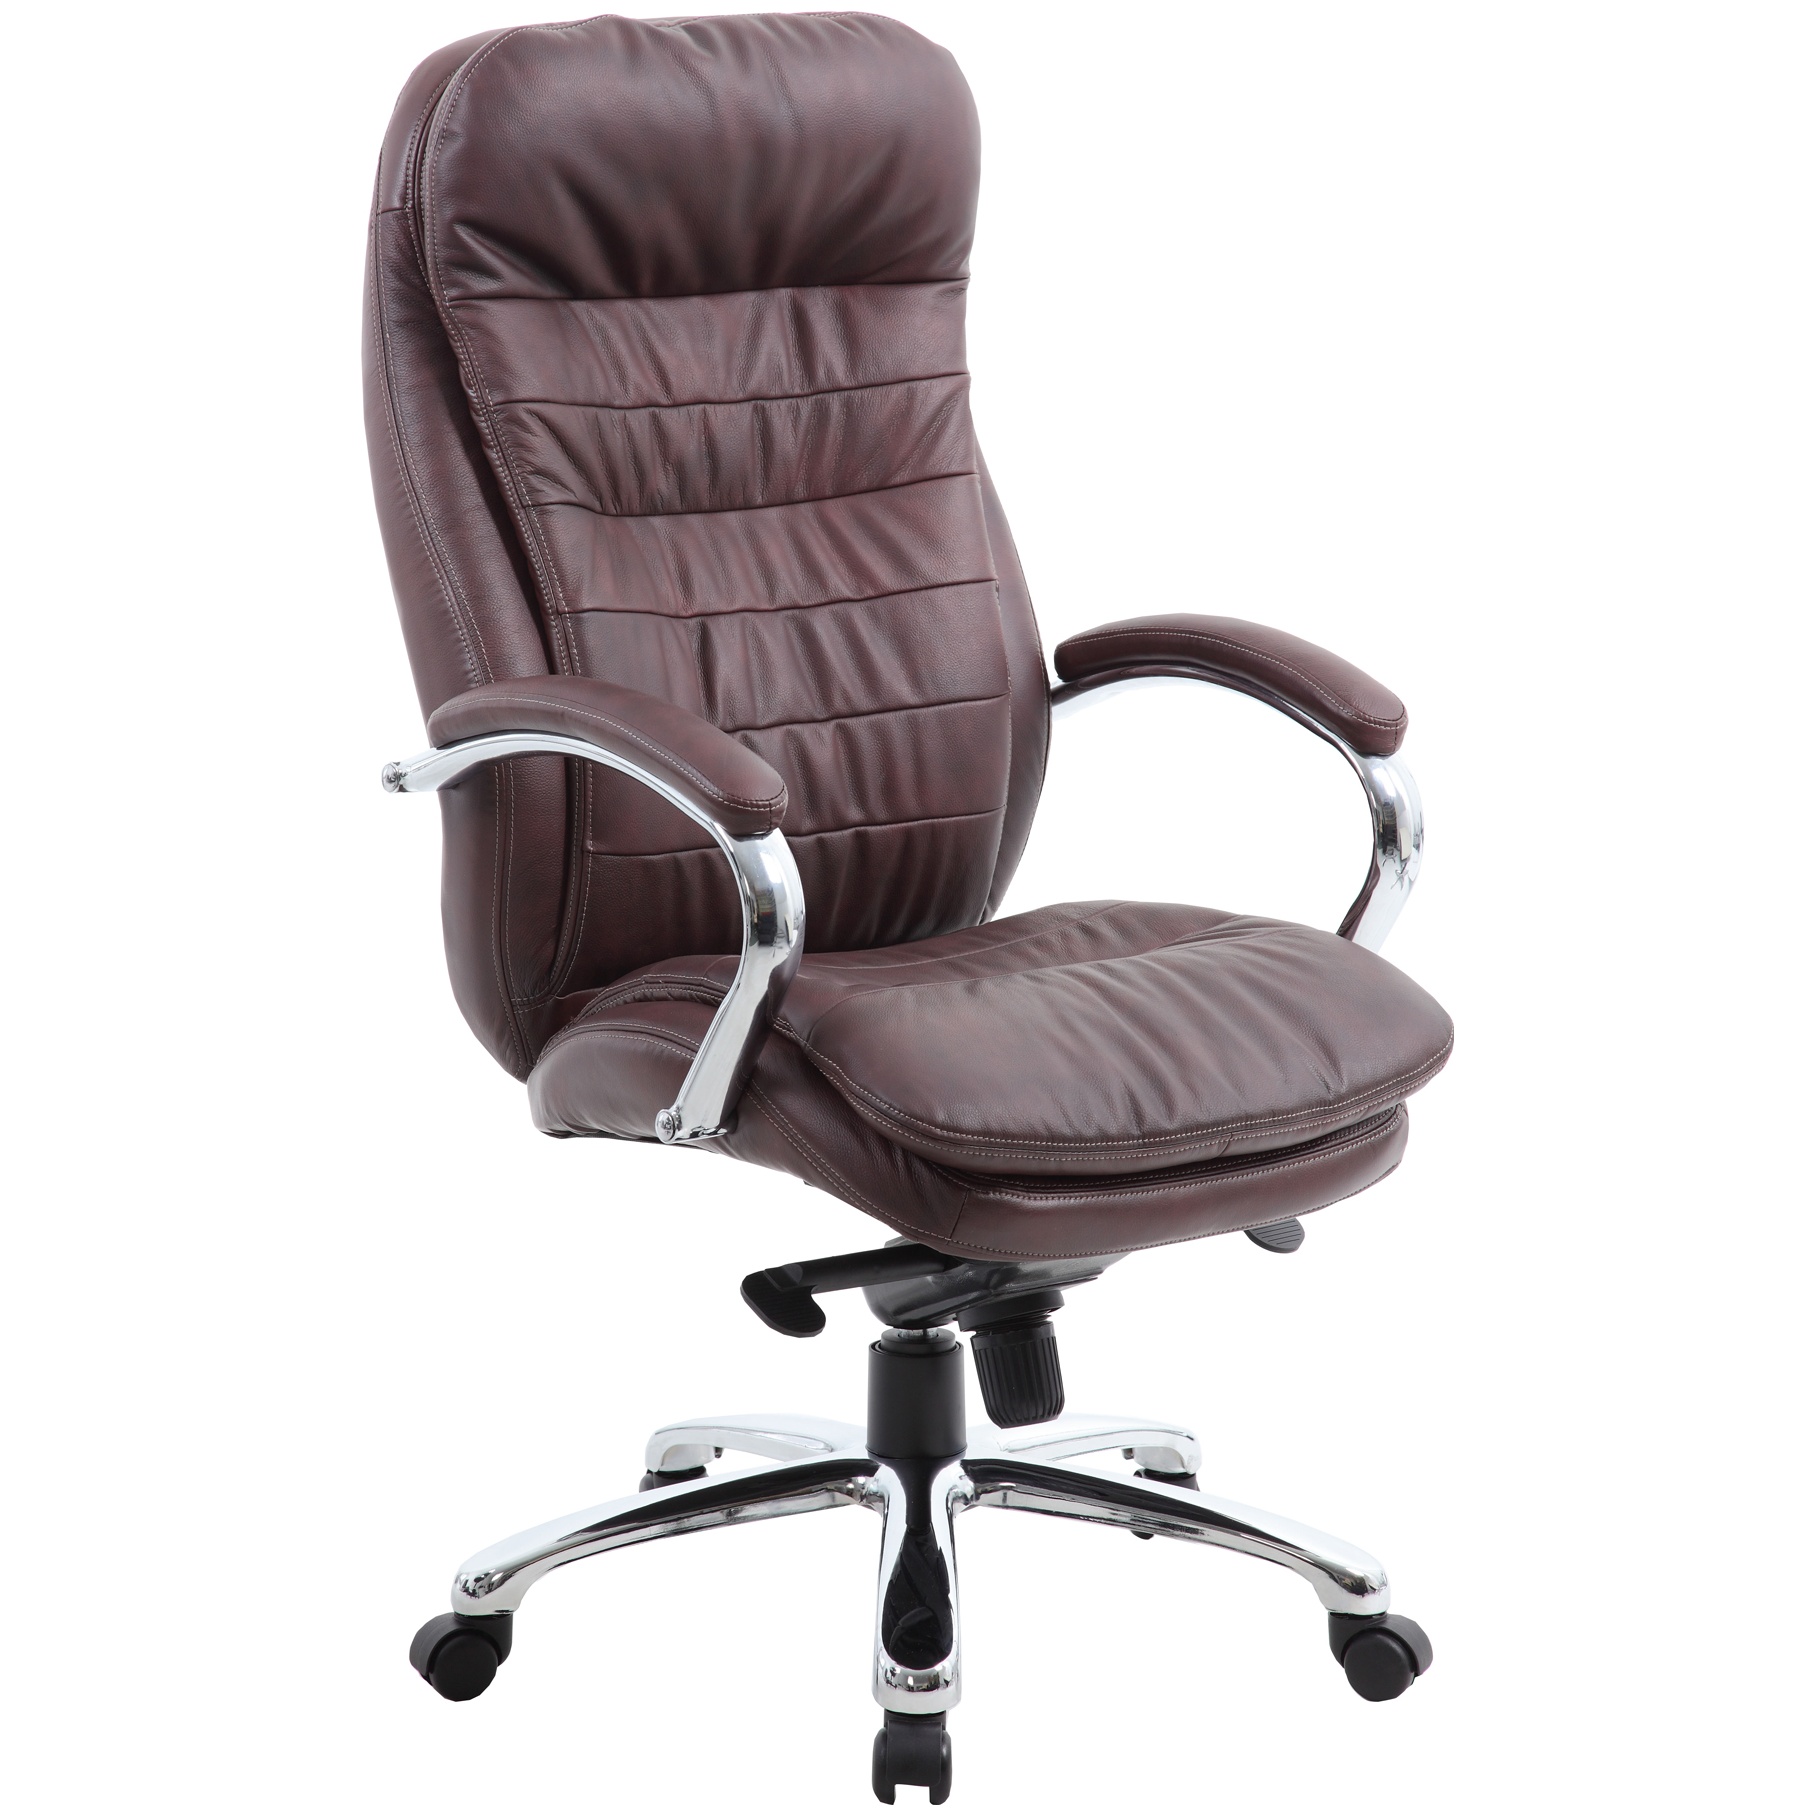 Siena Leather Executive Office Chair Brown